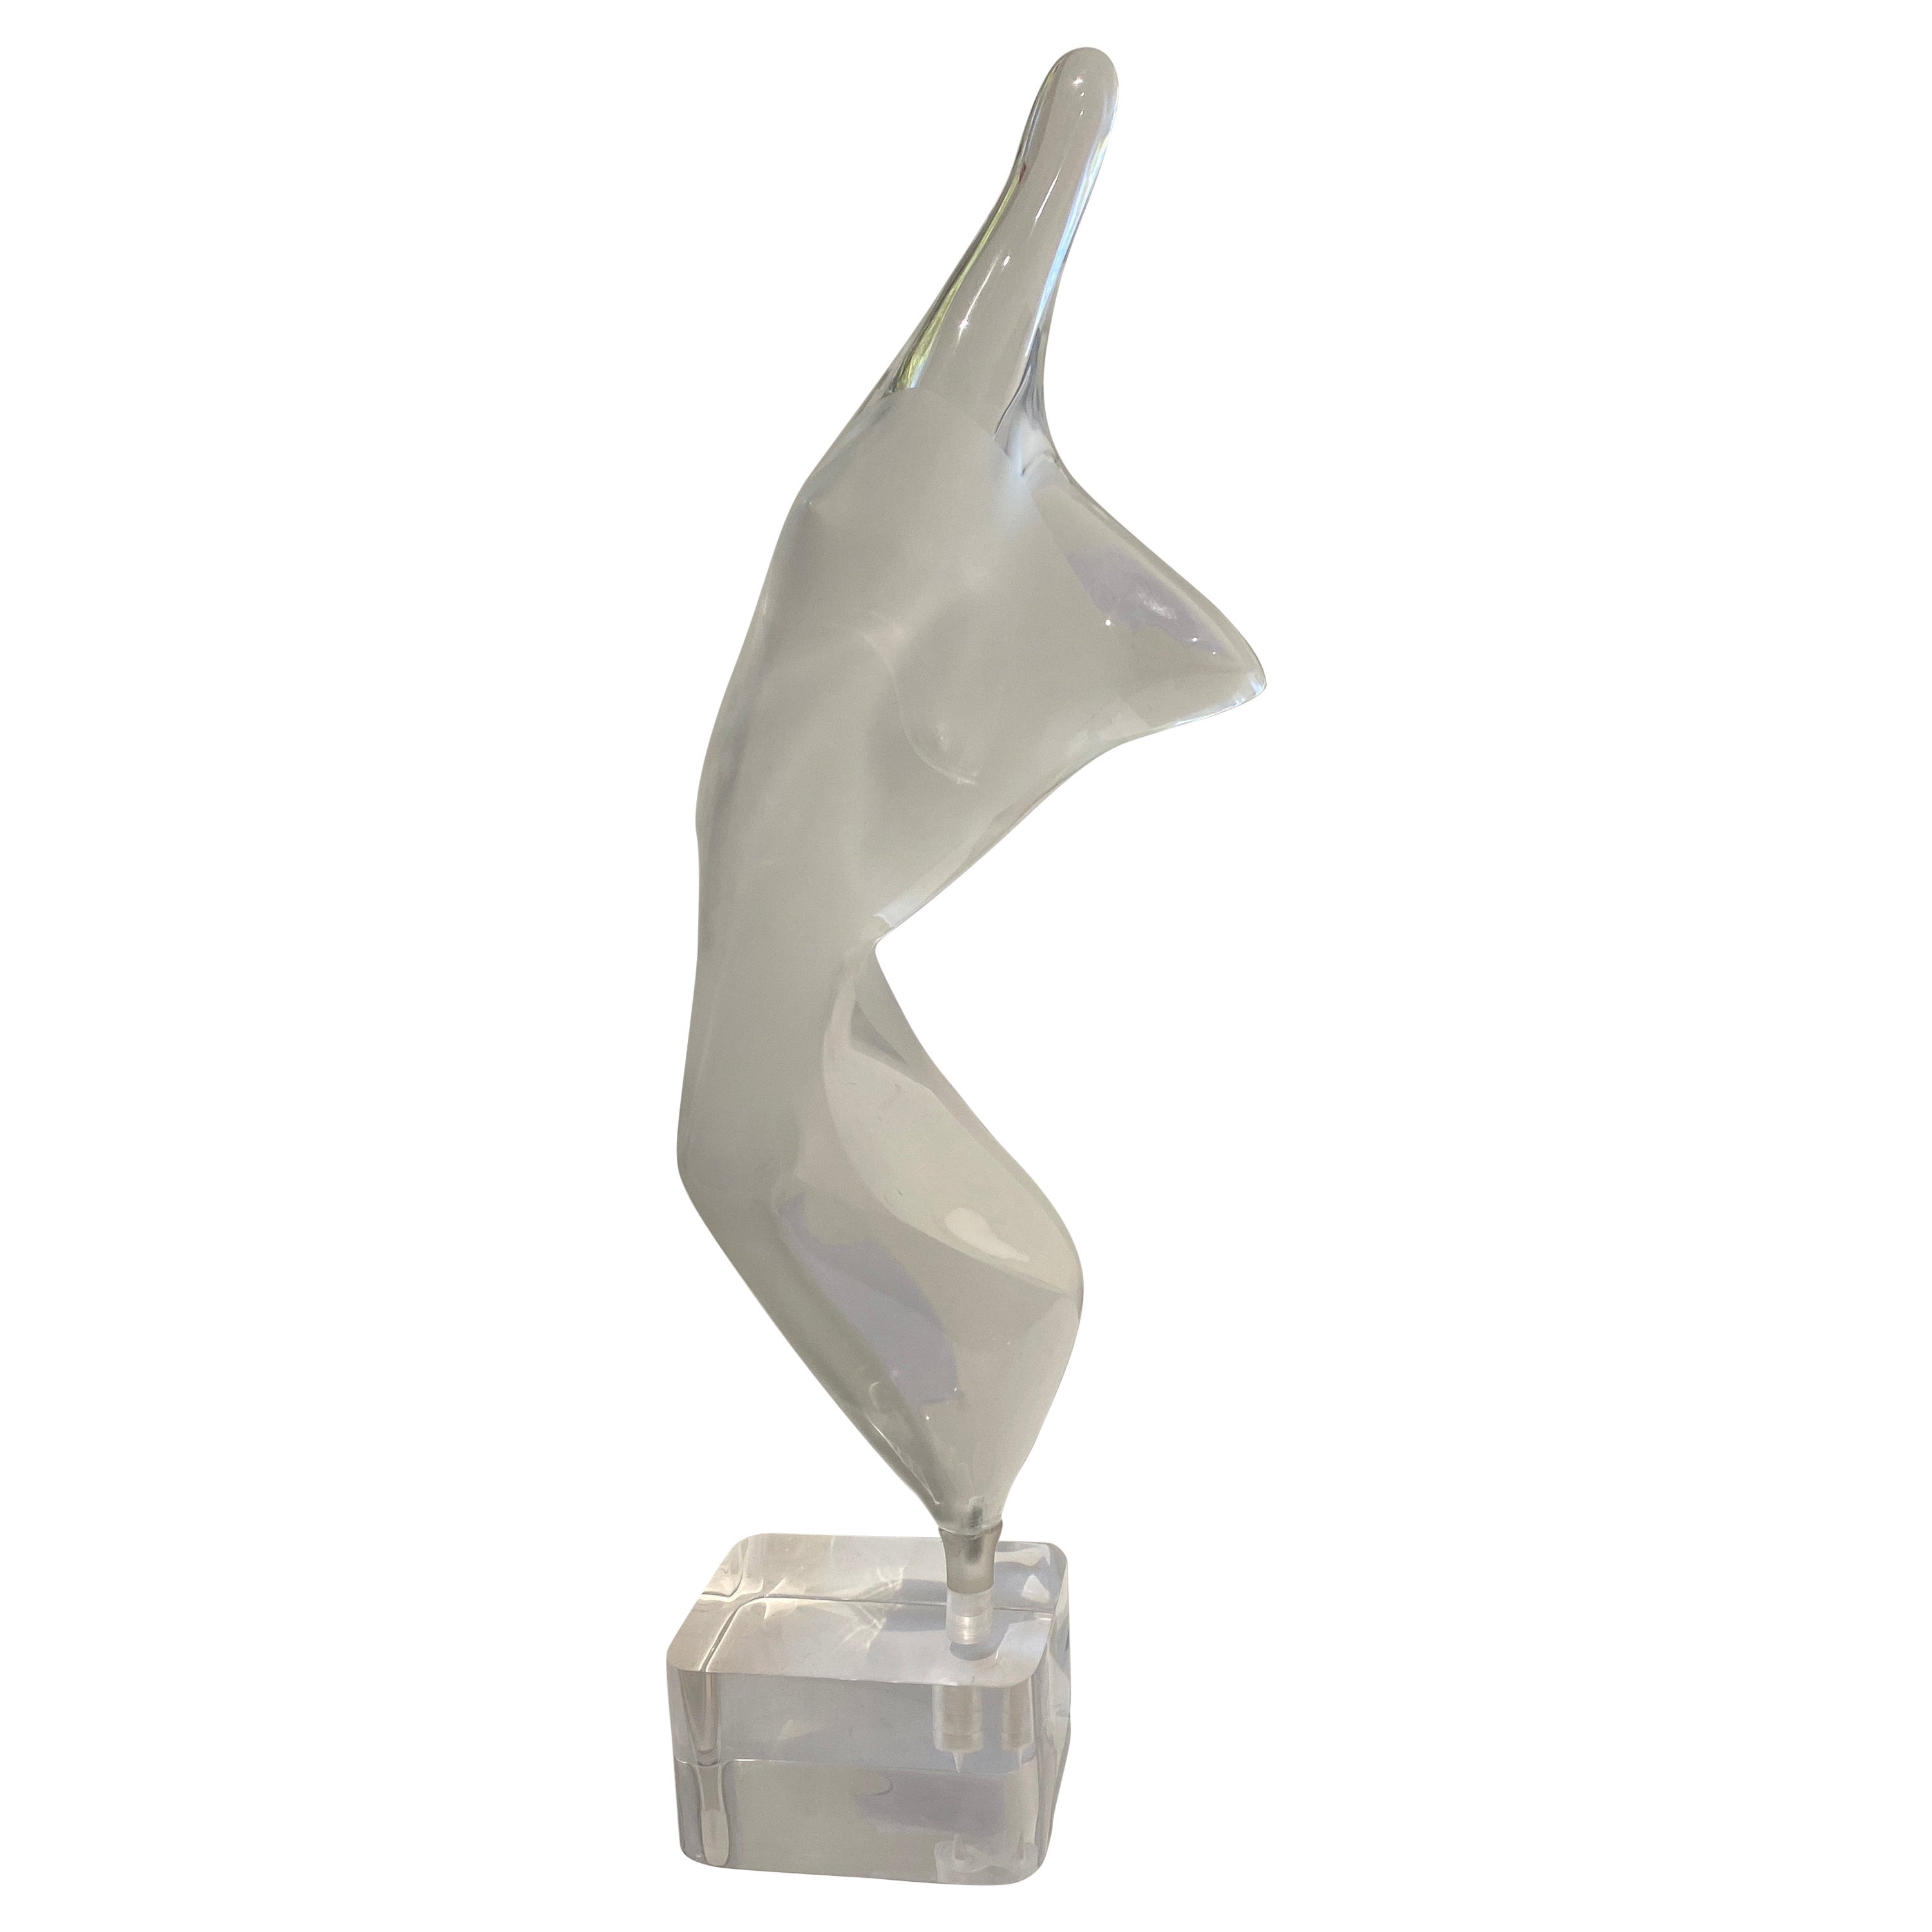 Lucite Stylized Nude Figure Signed Shacham 83' For Sale